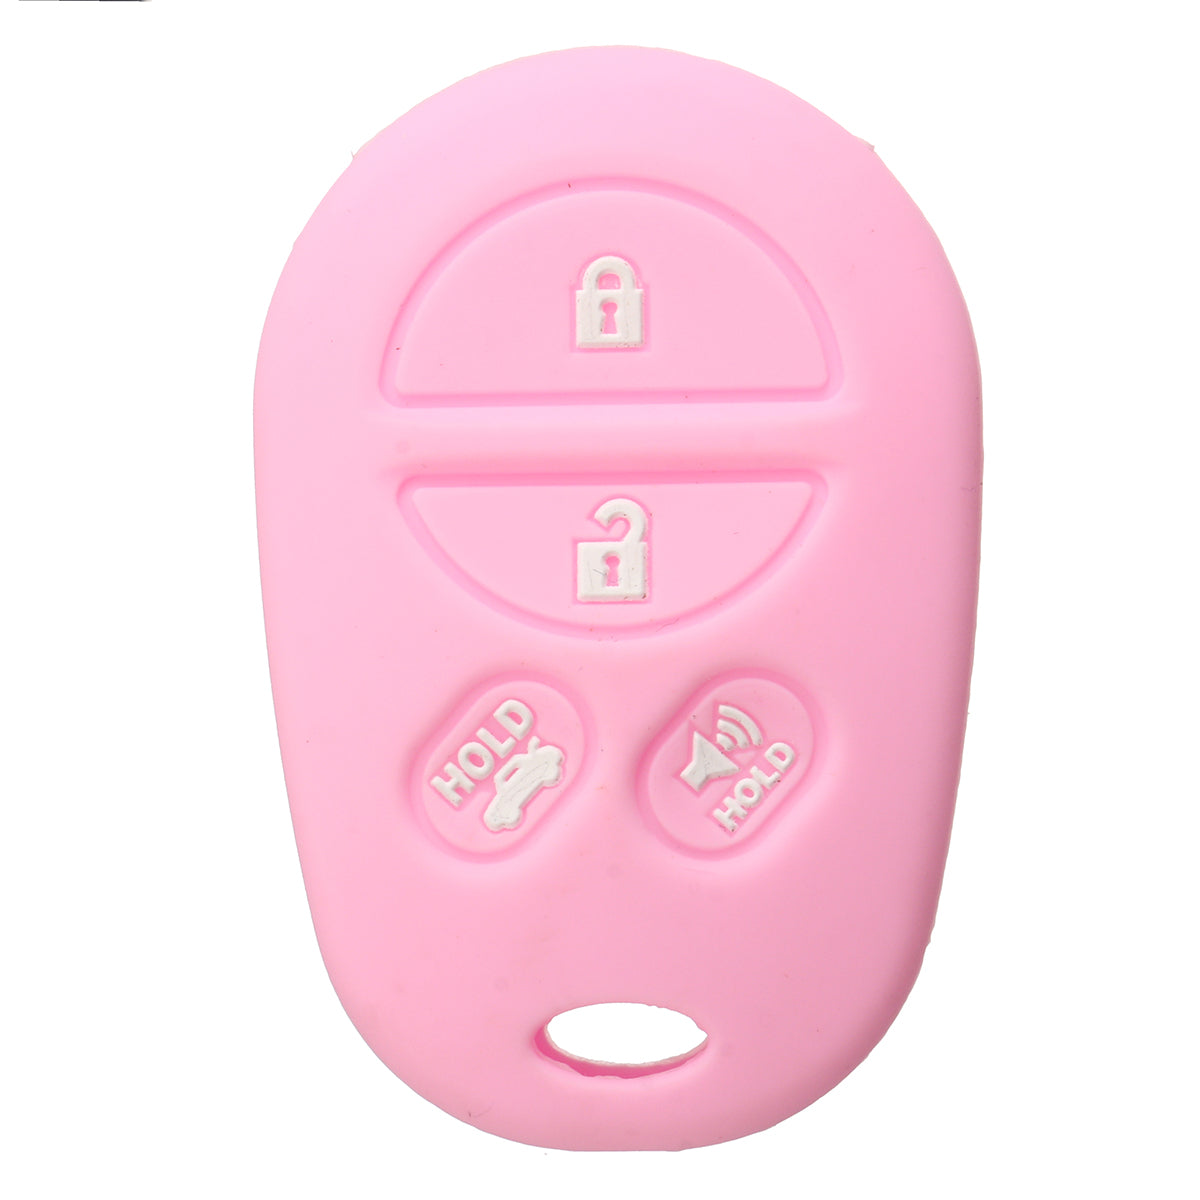 4 Buttons Silicone Car Cover Key Case Fit For Toyota Sienna Tacoma Tundra Remote Key - Auto GoShop